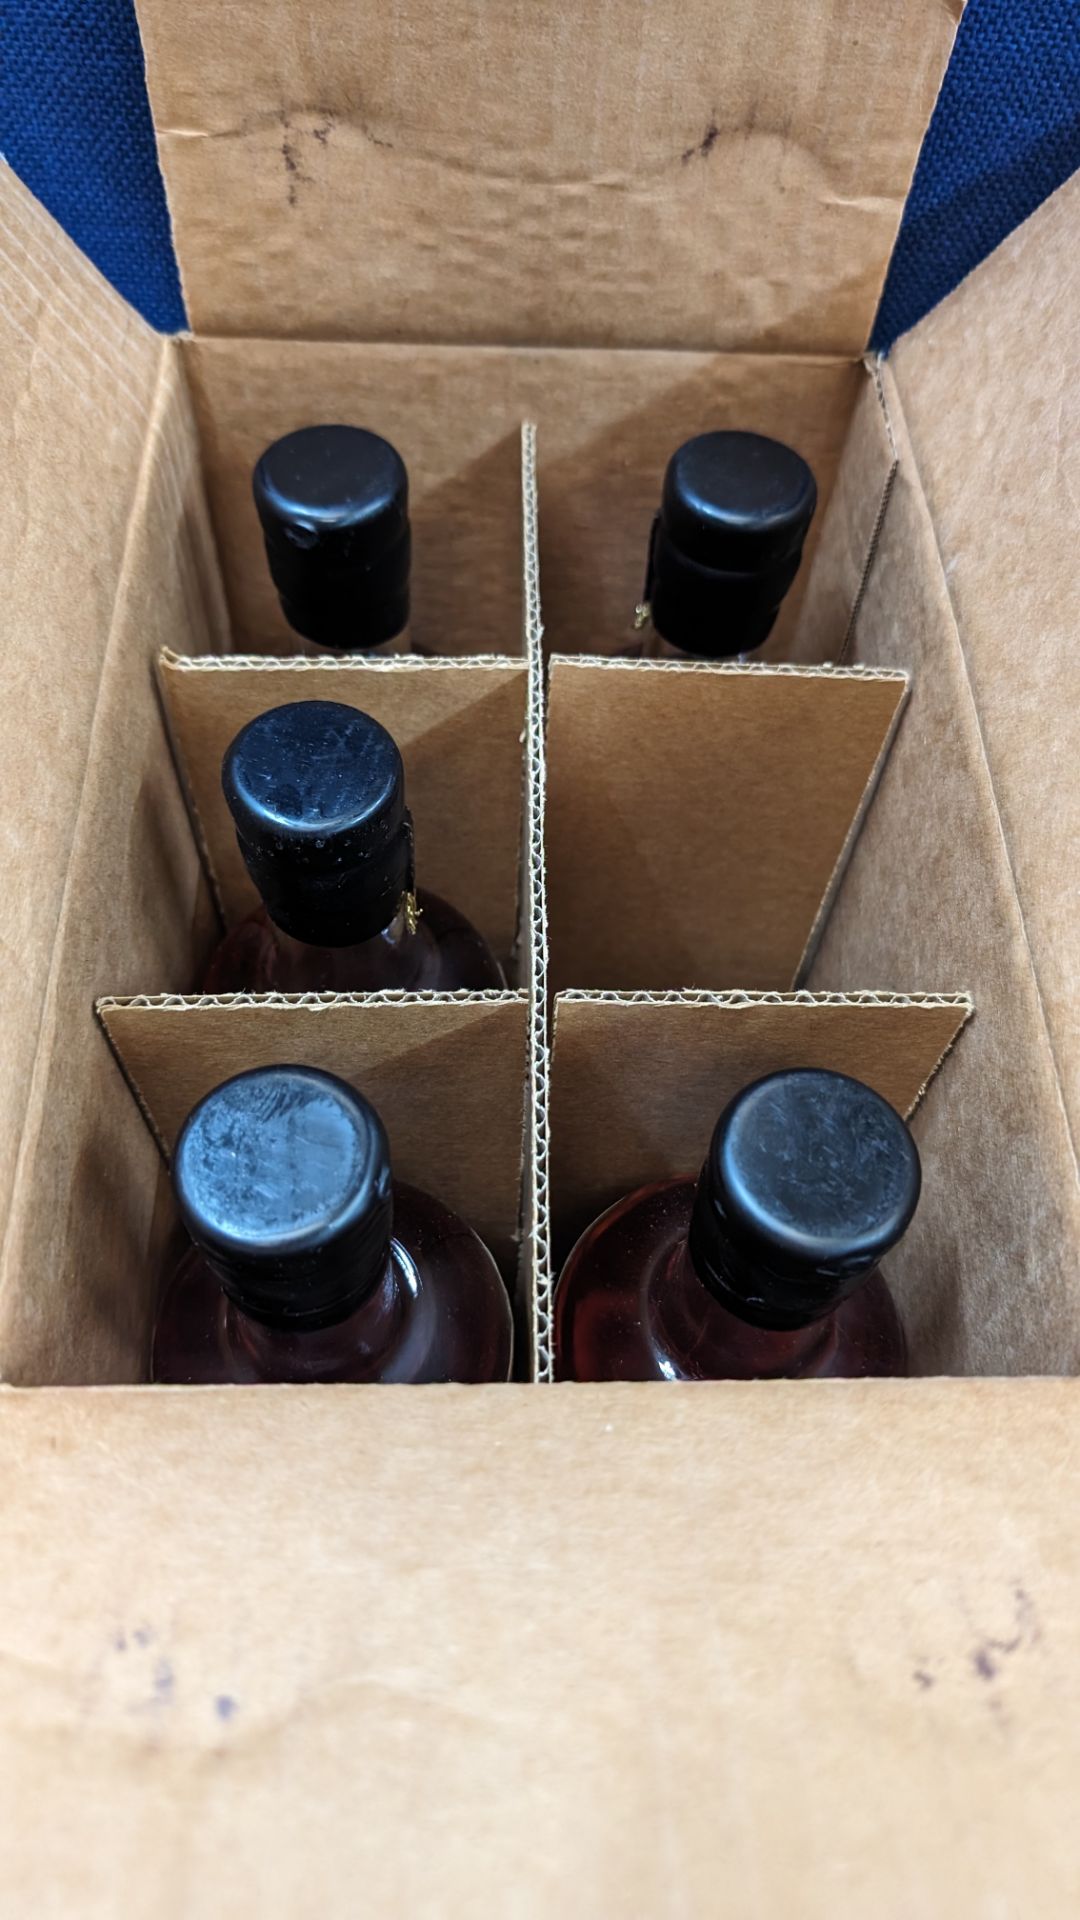 6 off 700ml bottles of Sonoma County 2nd Chance Wheat Double Alembic Pot Distilled Whiskey. In white - Image 9 of 9